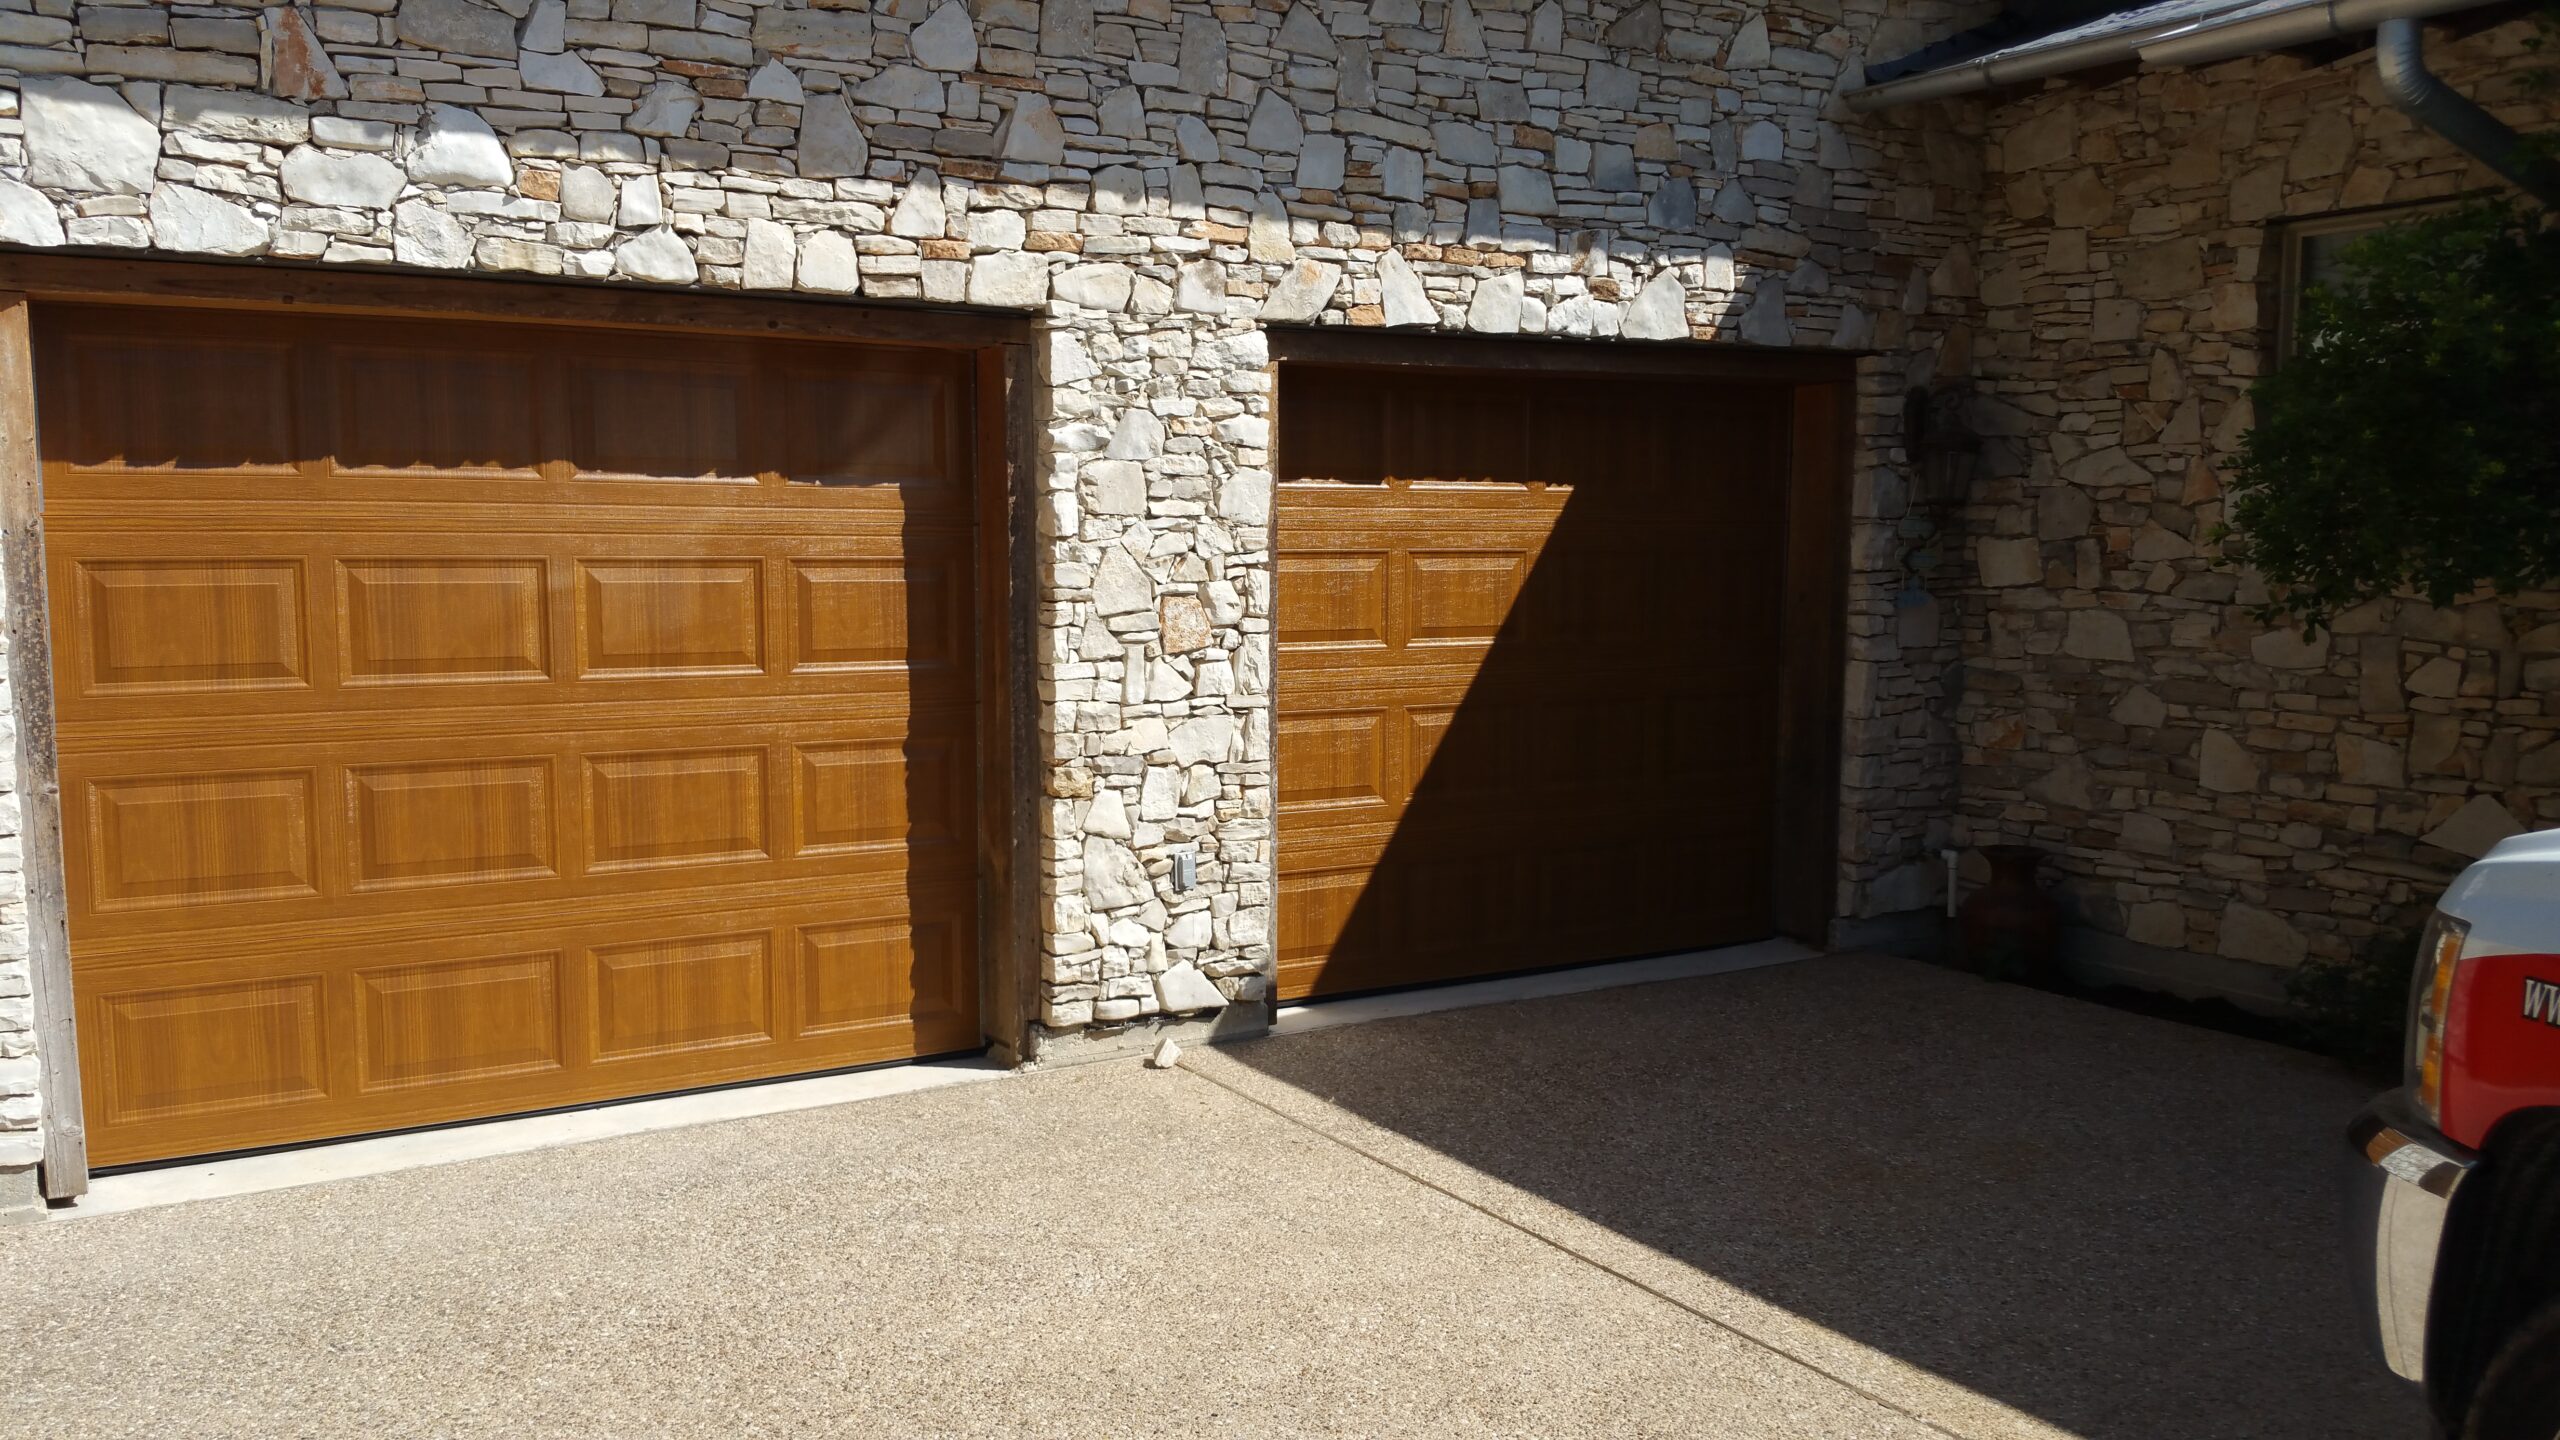 Upgrading Your Garage Door- Options and Considerations